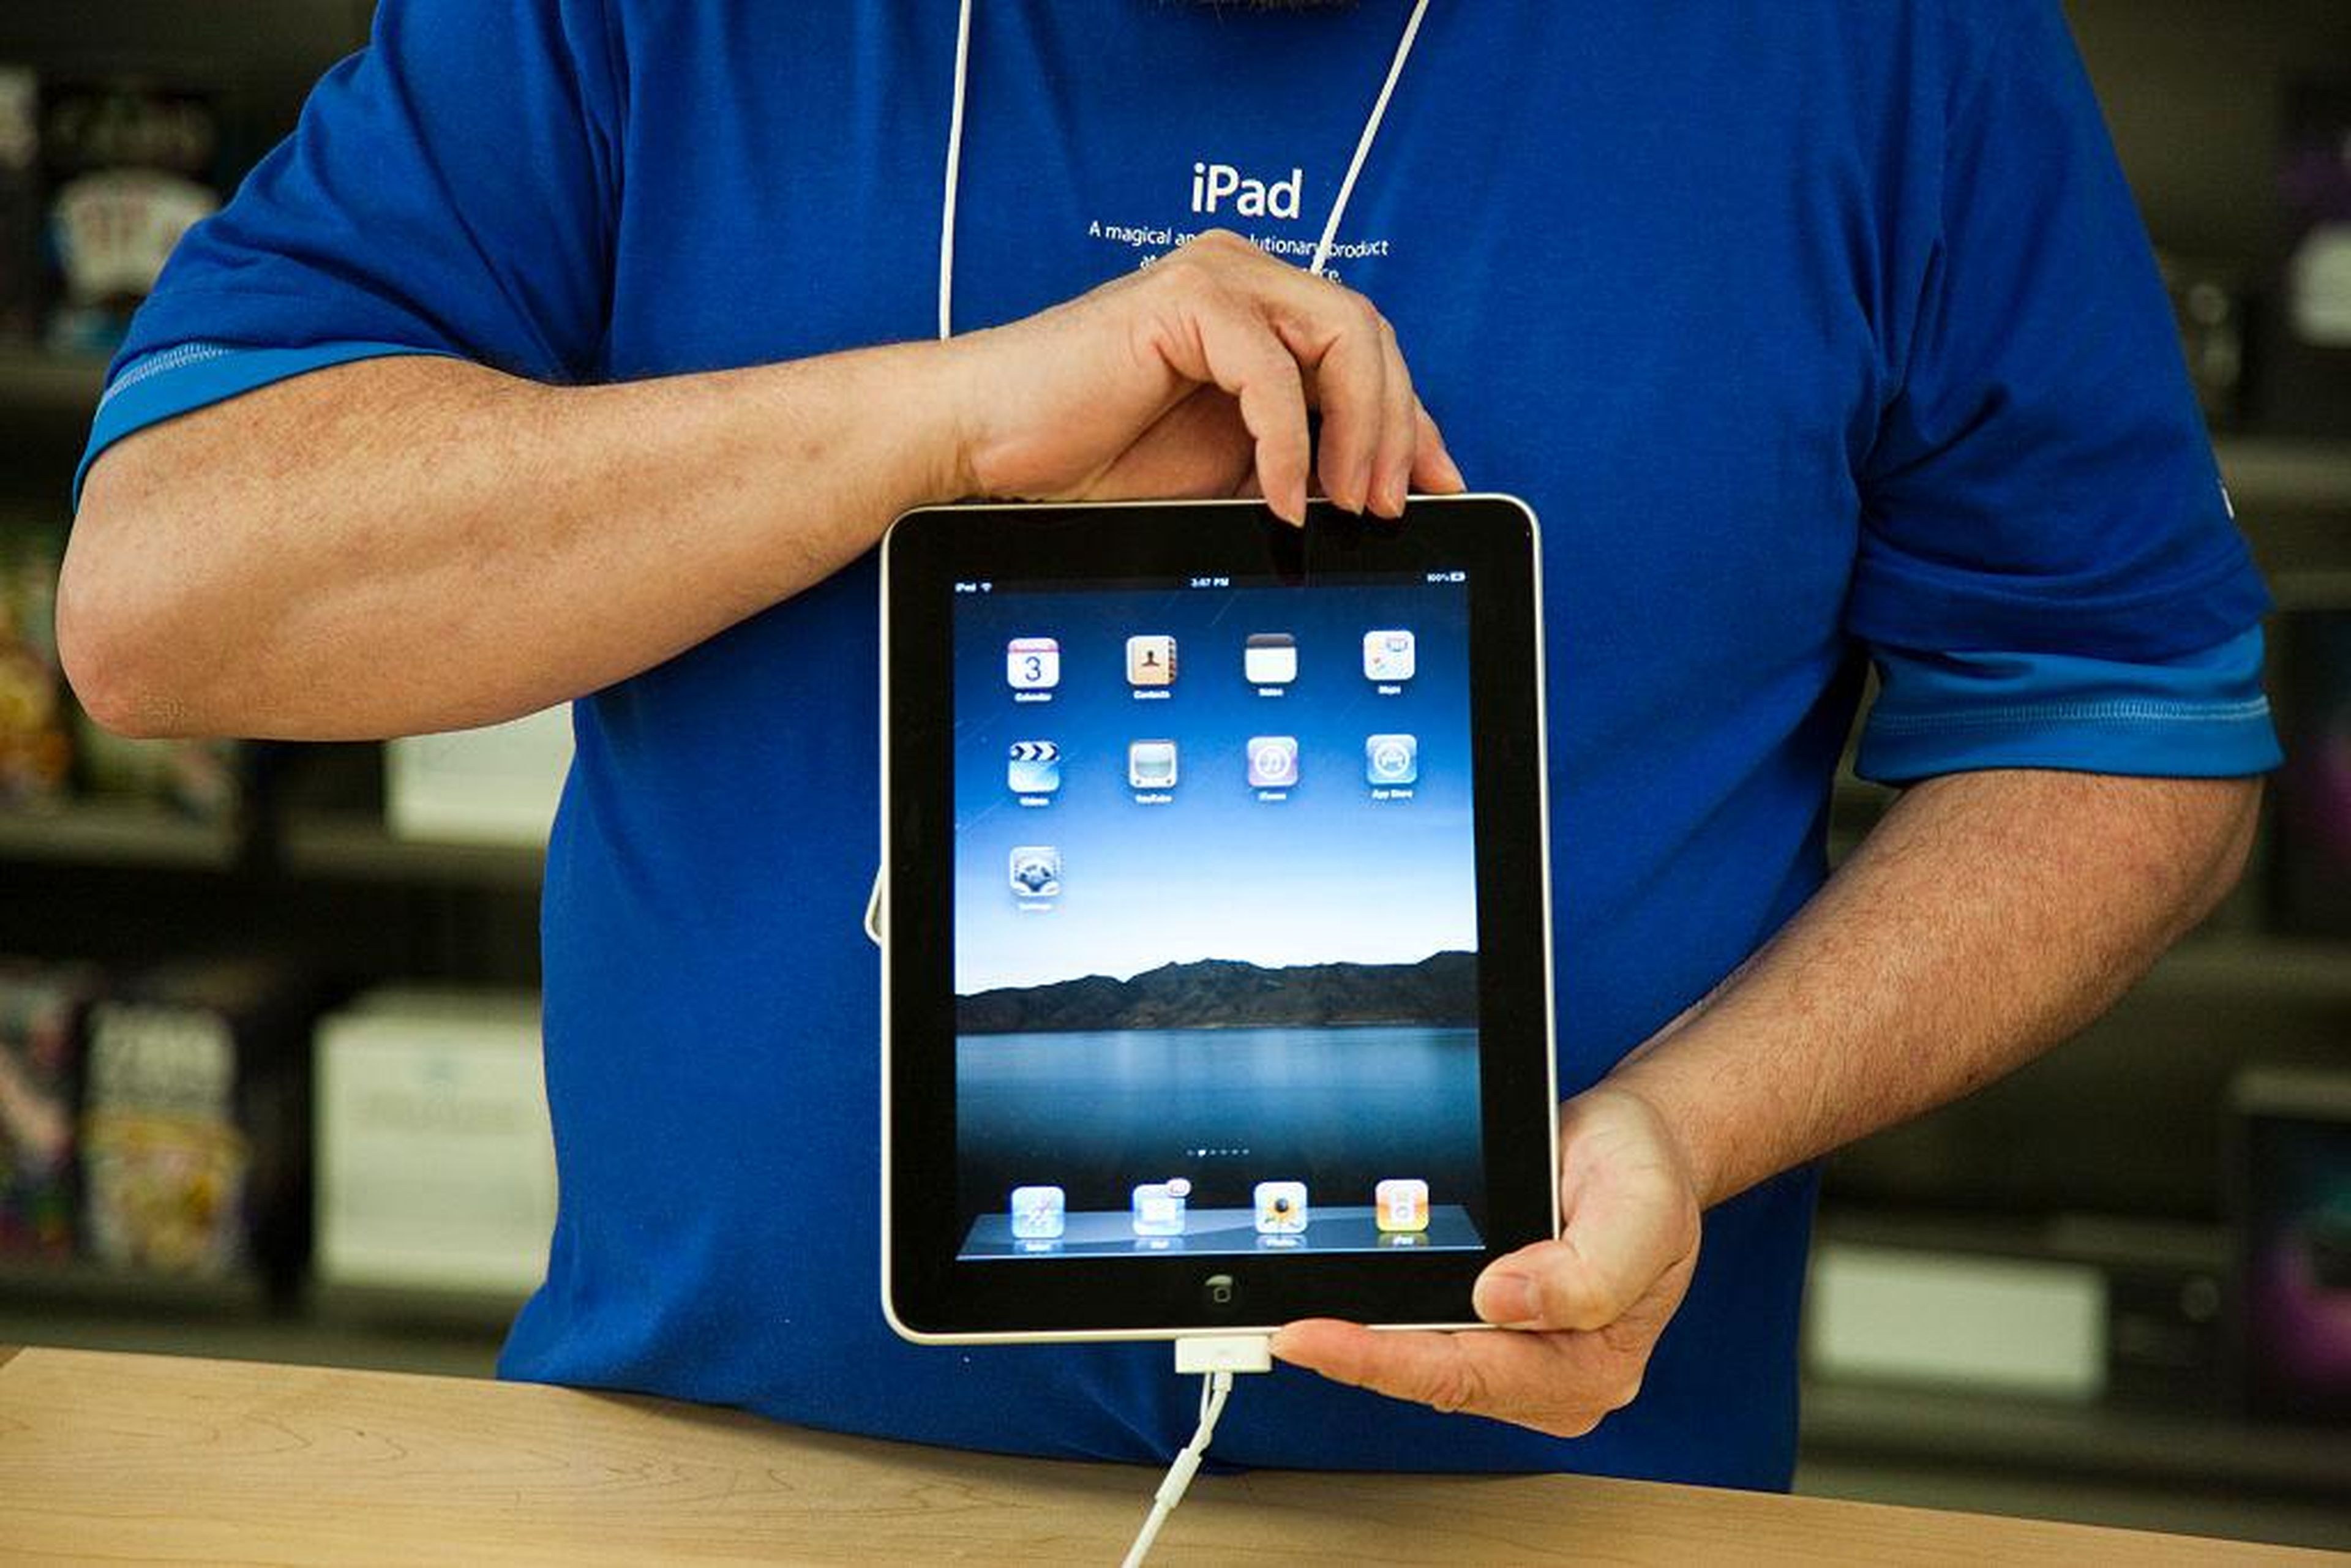 Apple released the first iPad nearly a decade ago, on April 3, 2010. At first, many people thought it would tank.